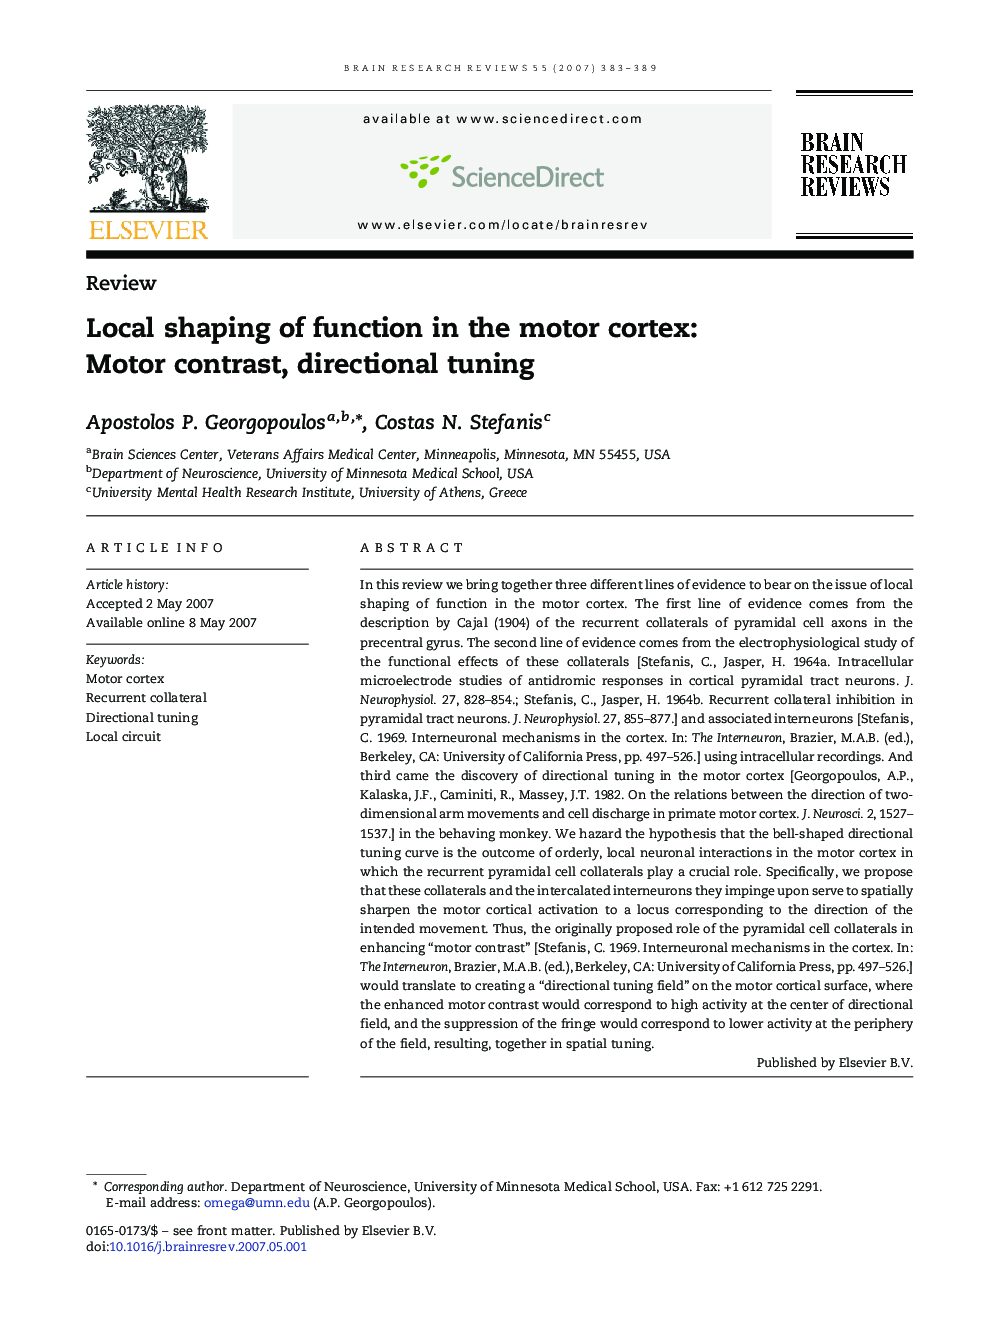 Local shaping of function in the motor cortex: Motor contrast, directional tuning